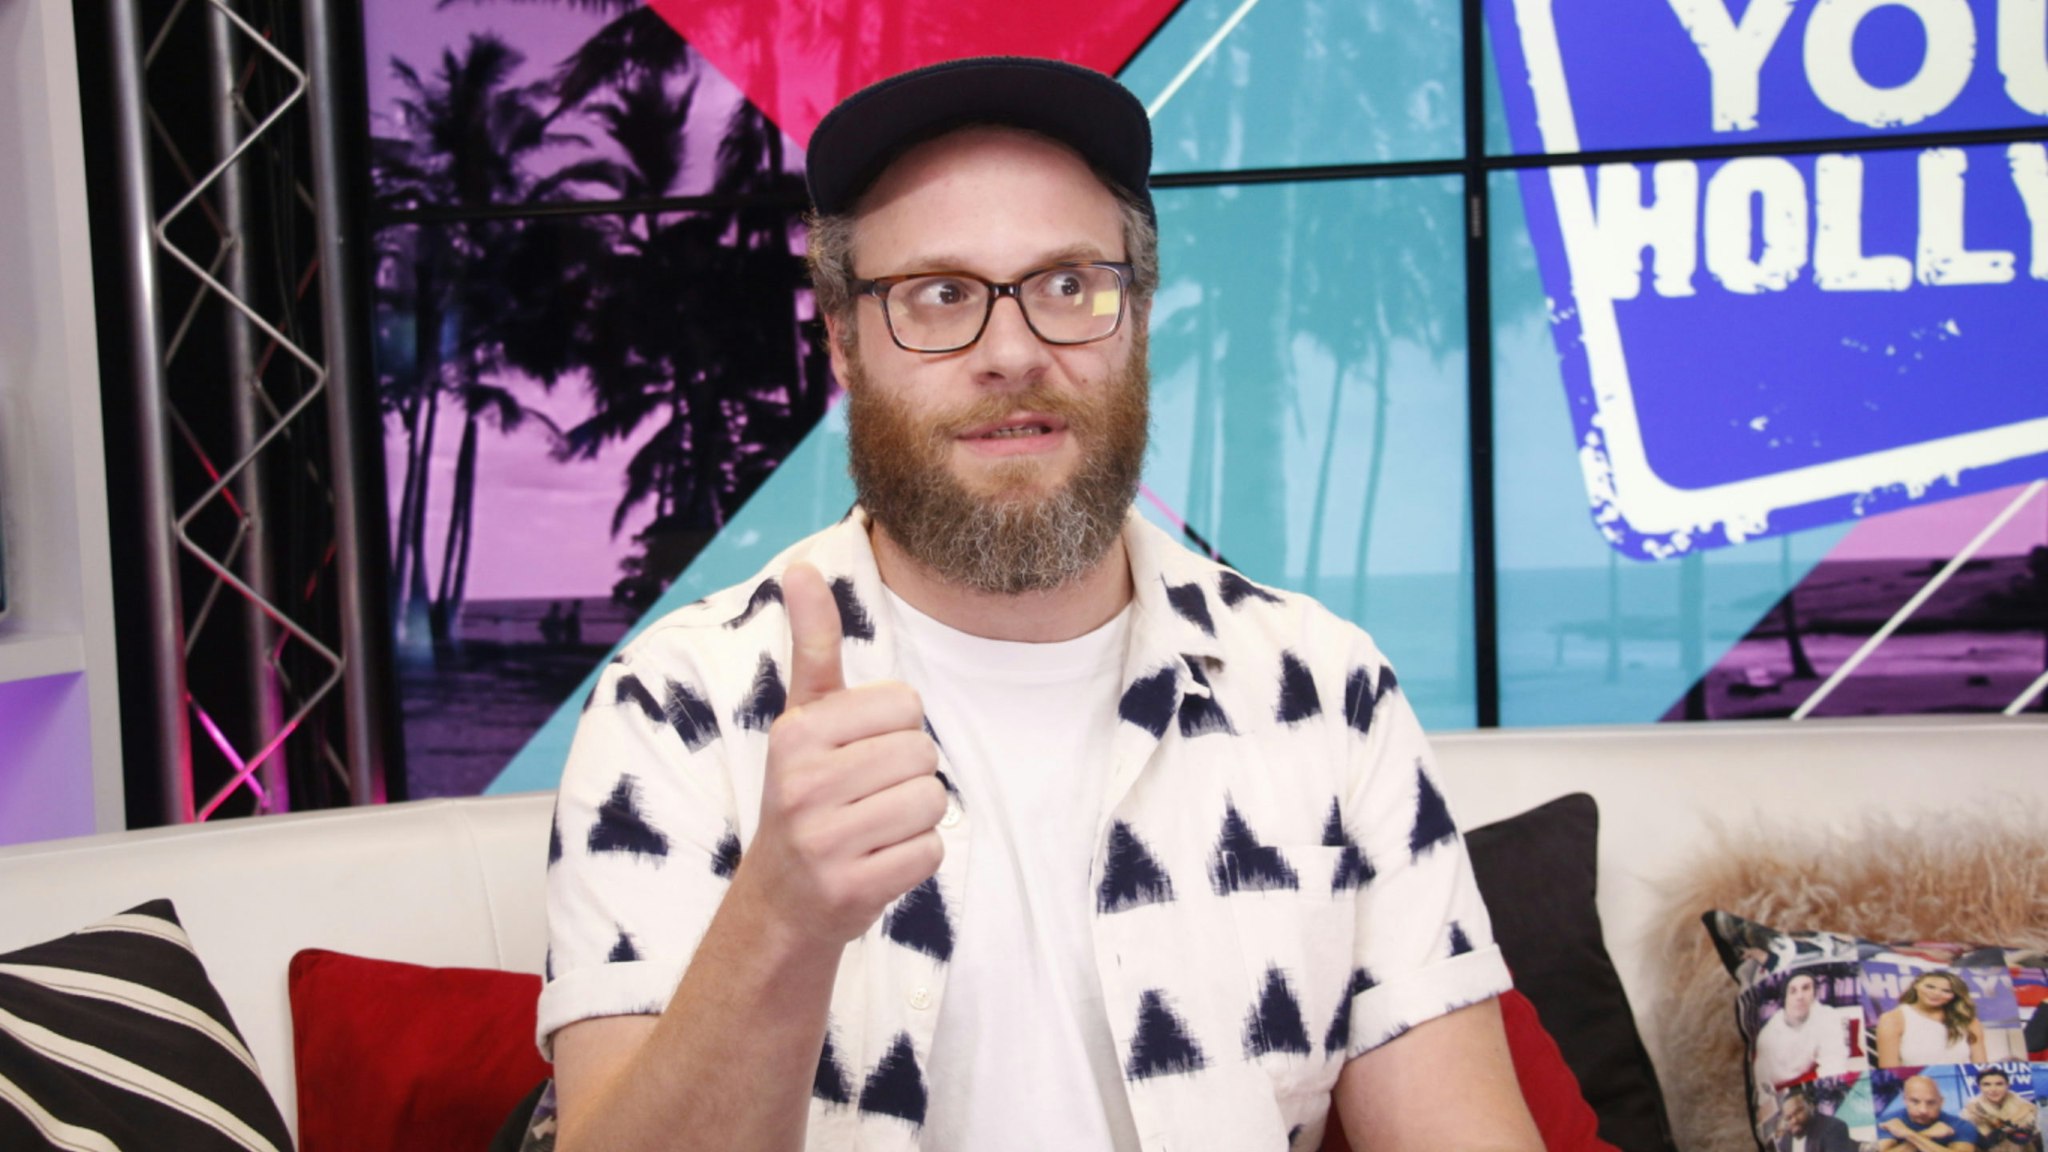 Seth Rogen visits the Young Hollywood Studio on July 28, 2018 in Los Angeles, California.